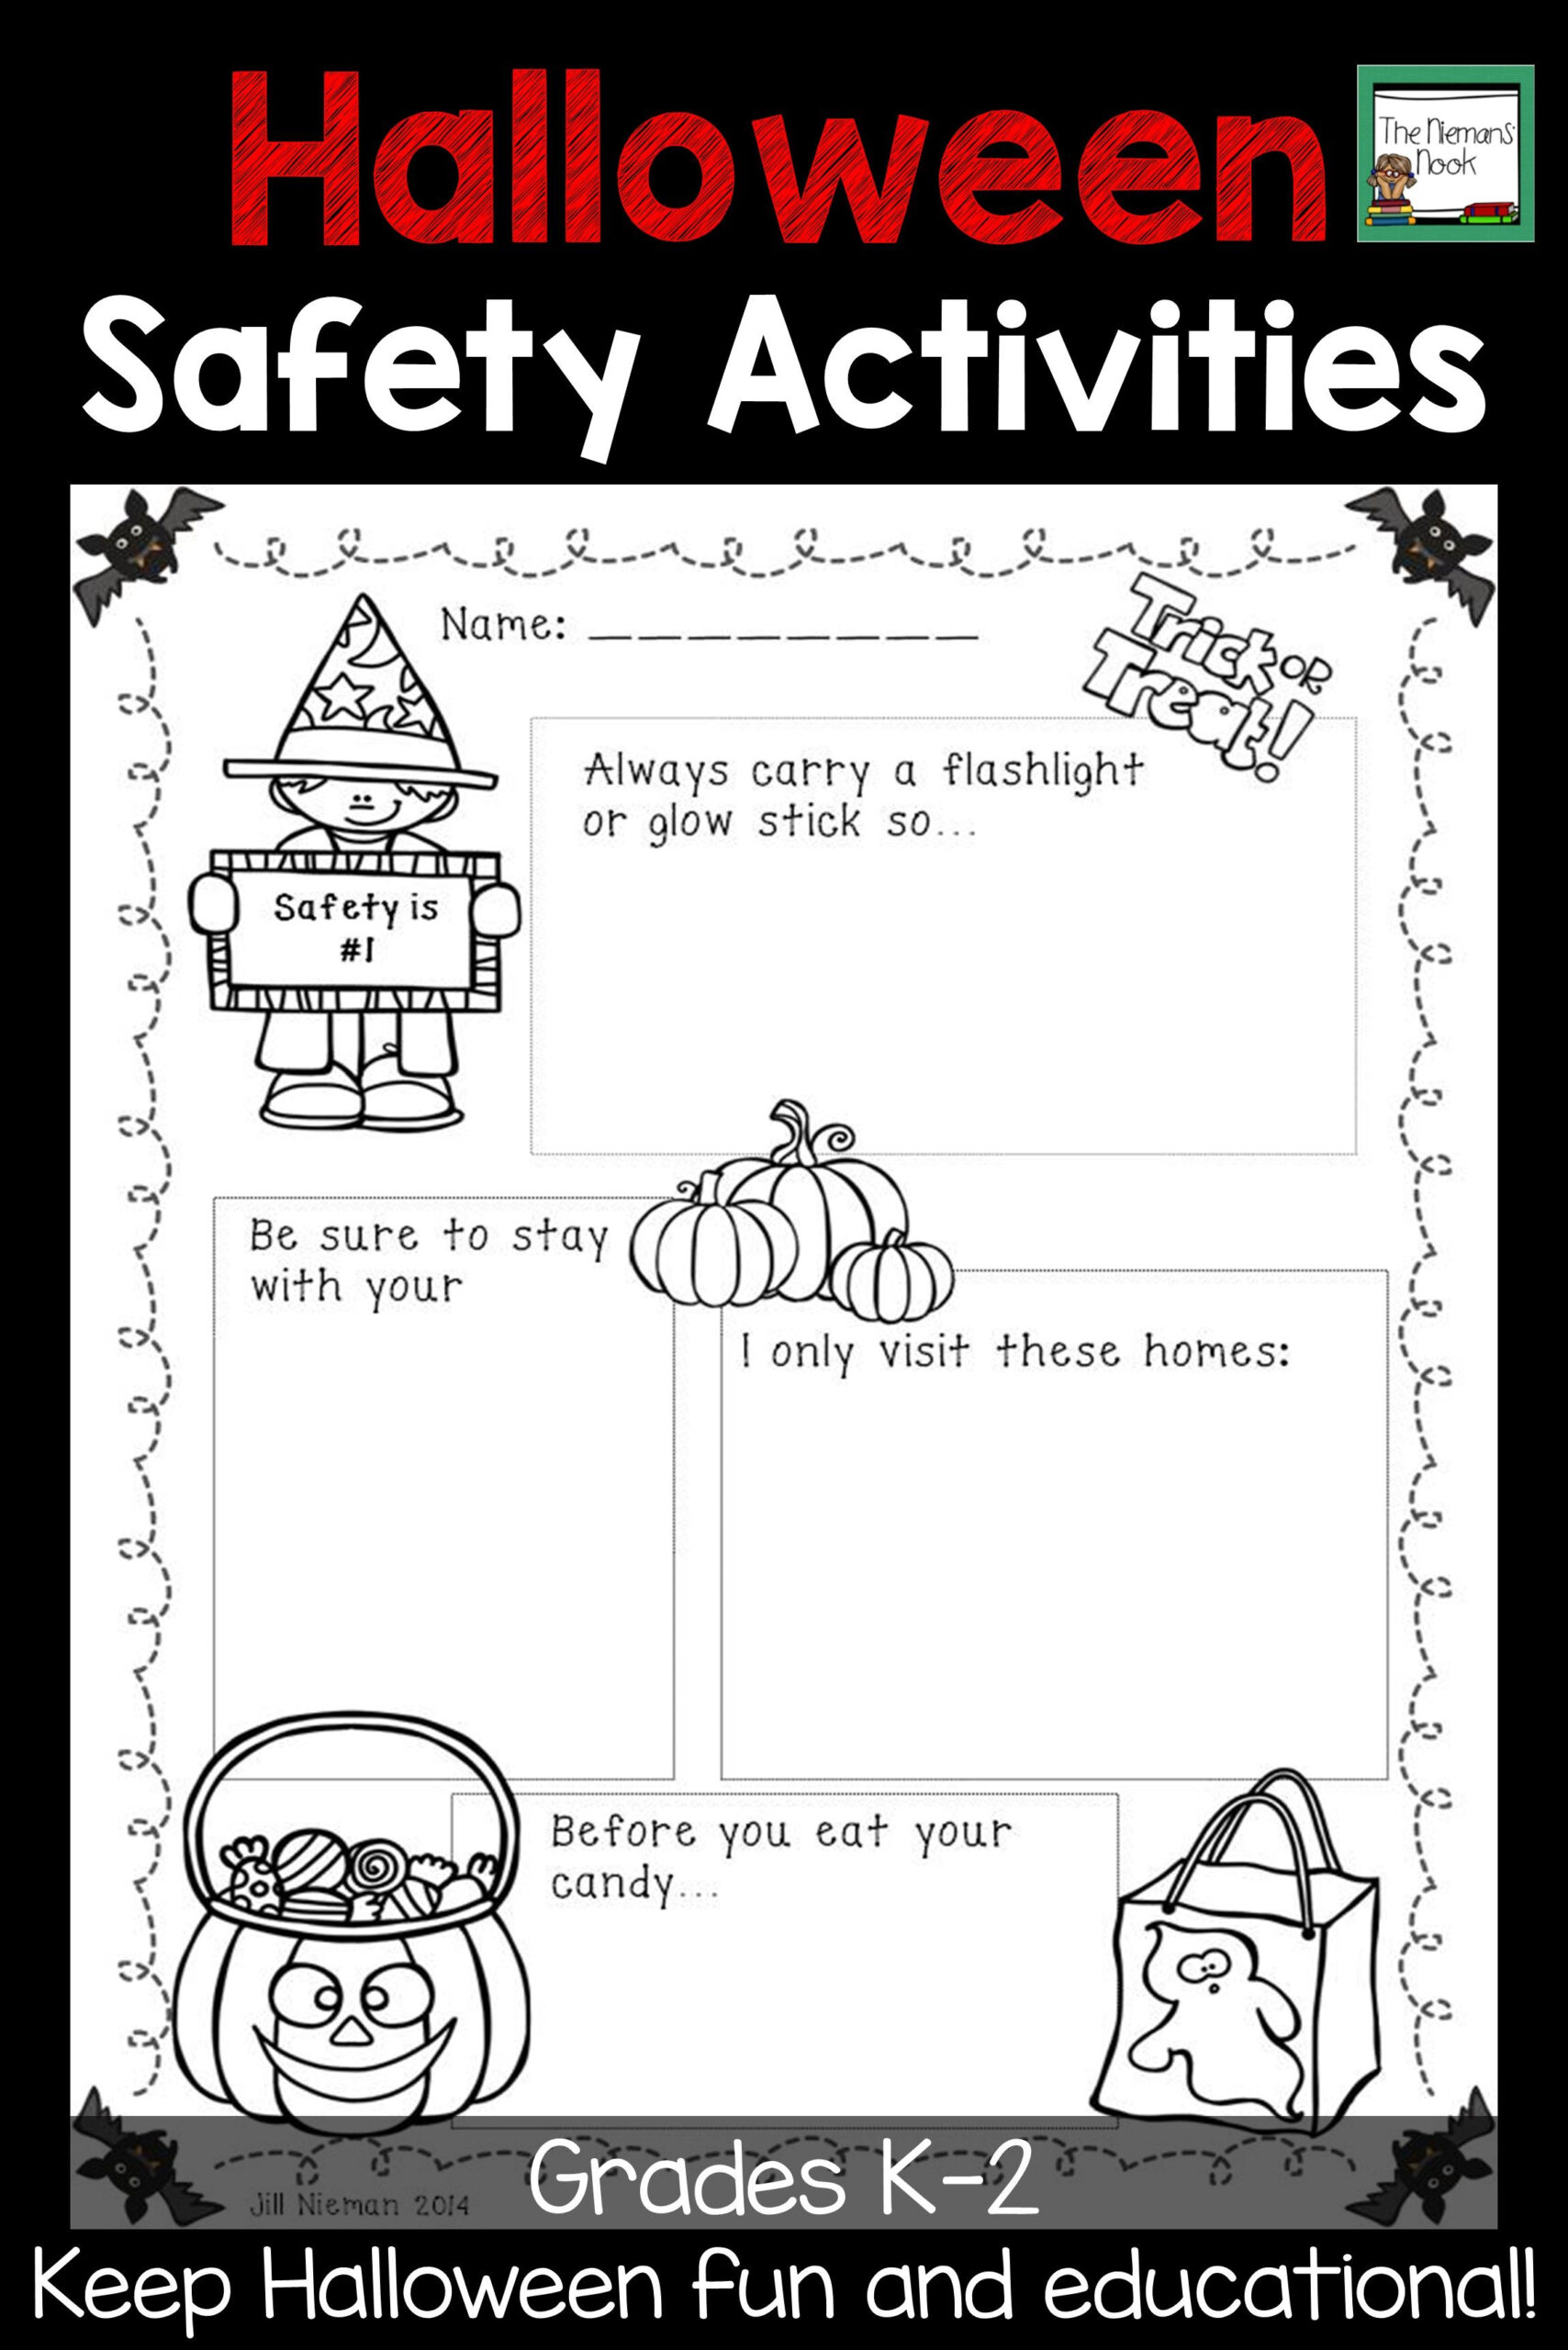 Your Students Will Love Learning About Halloween Safety With